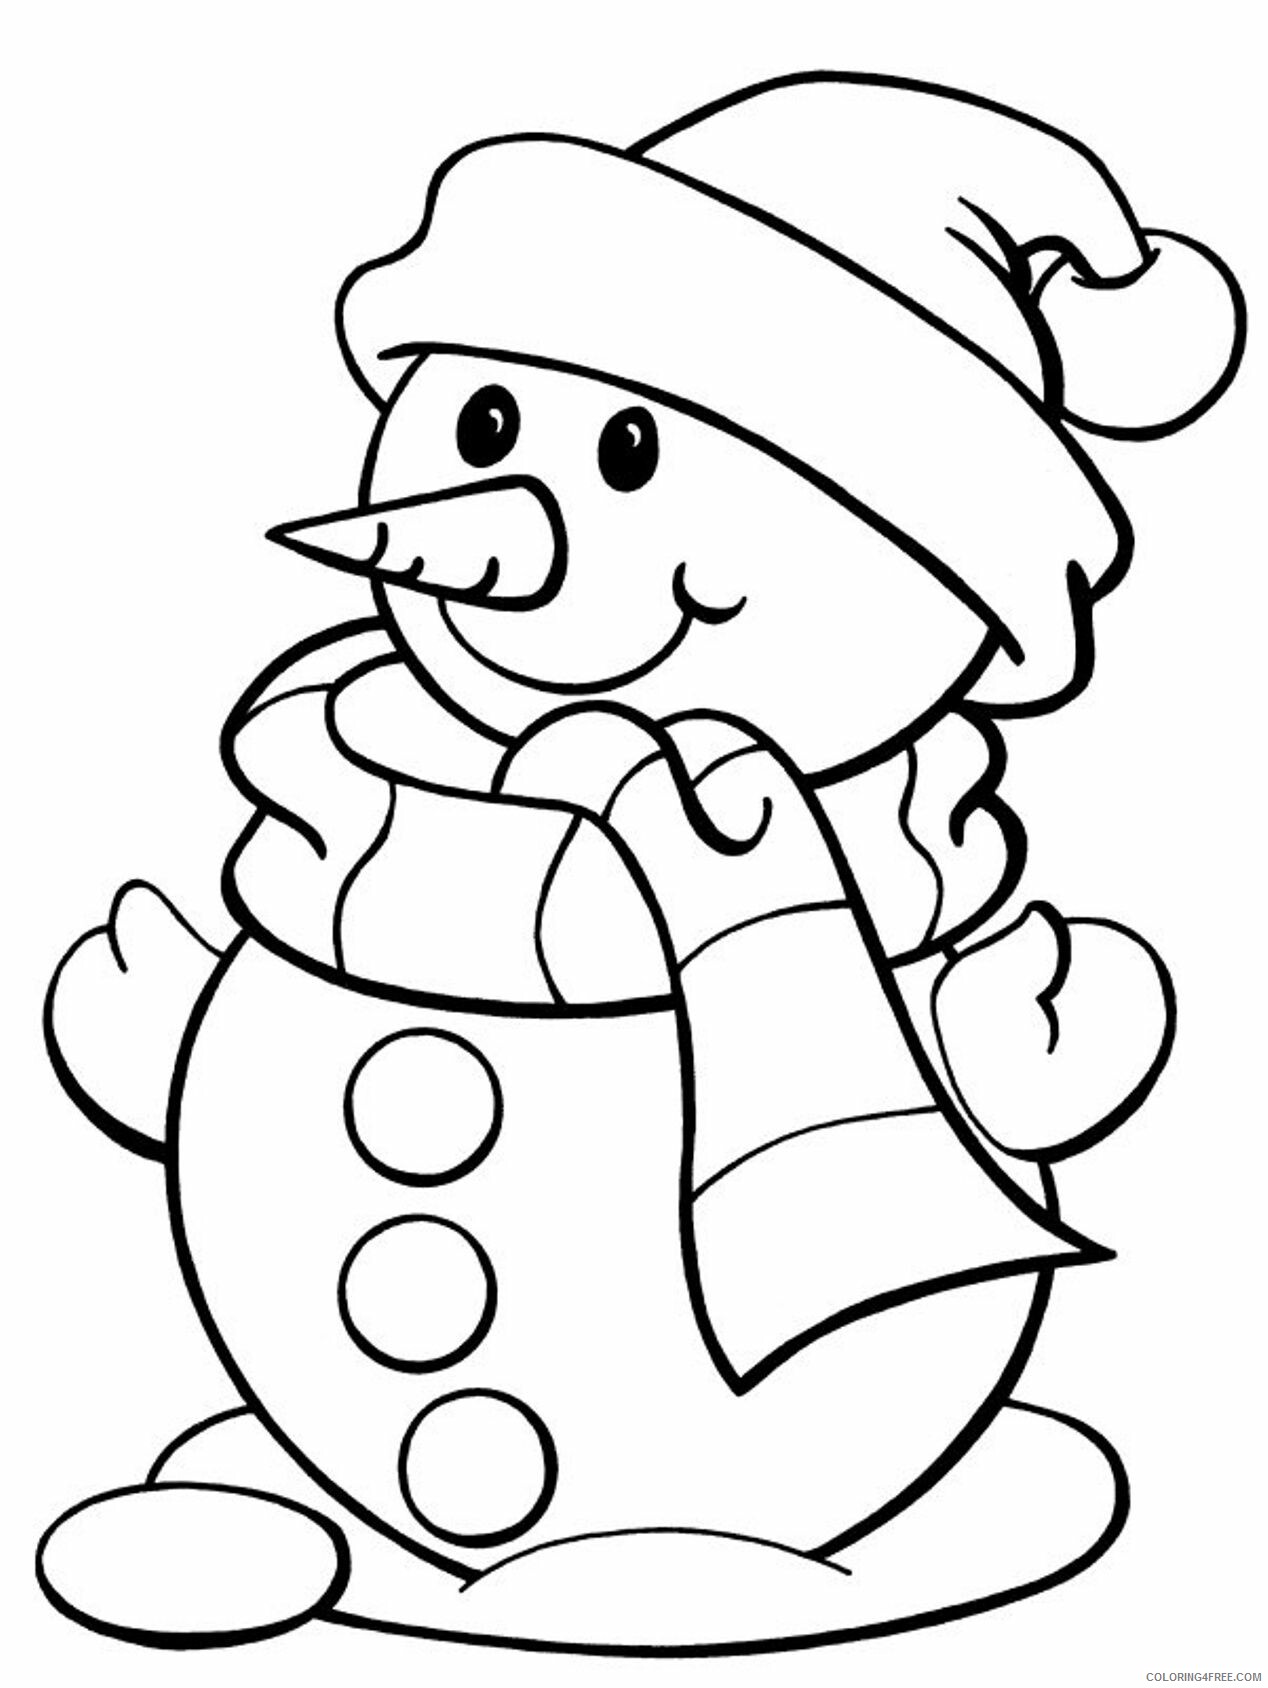 Snowman Coloring Pages Winter Snowman Printable 2021 5622 Coloring4free